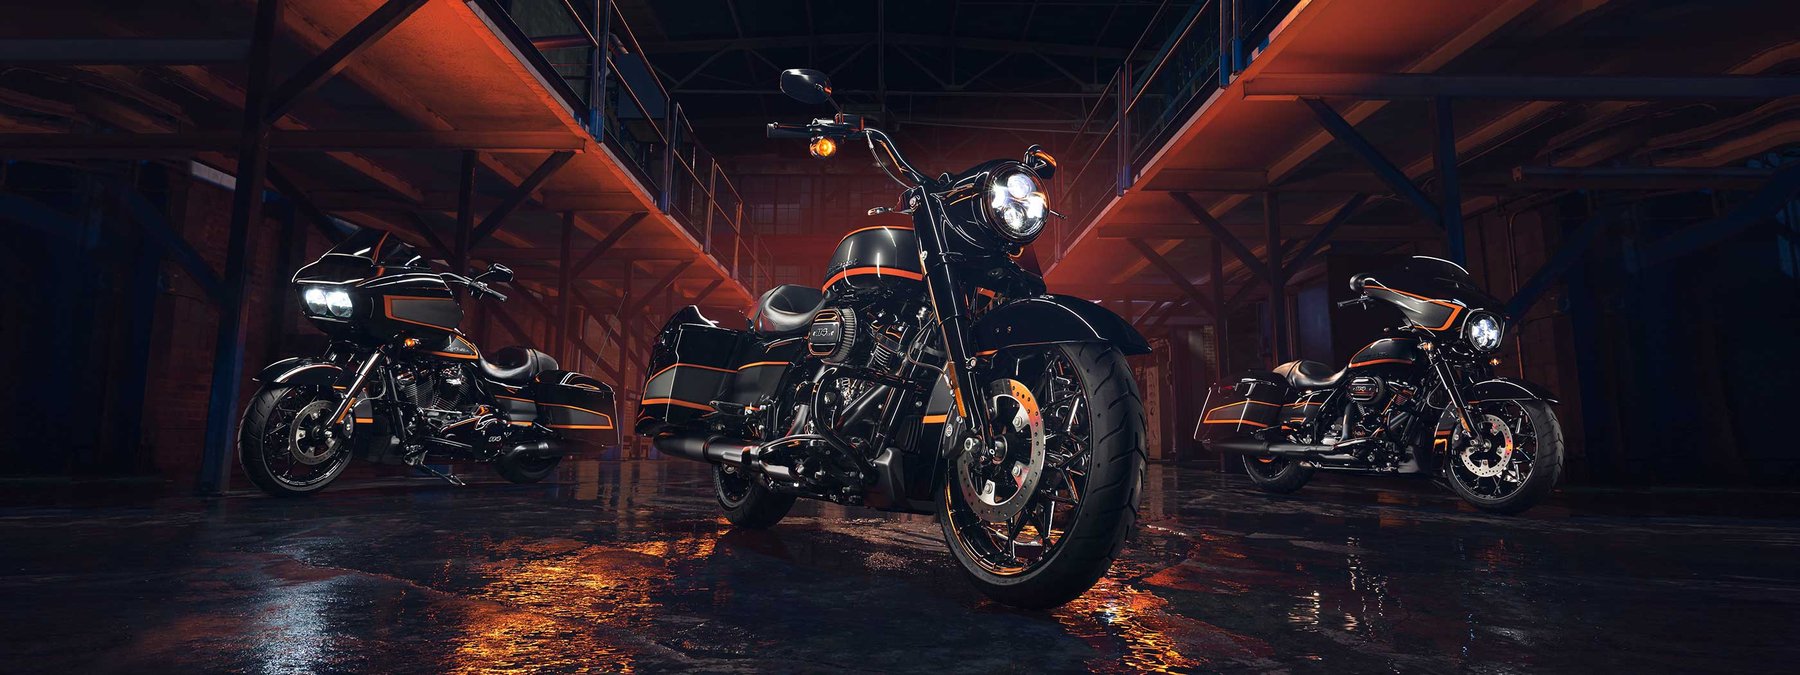 Apex custom paint featured on Harley-Davidson motorcycles